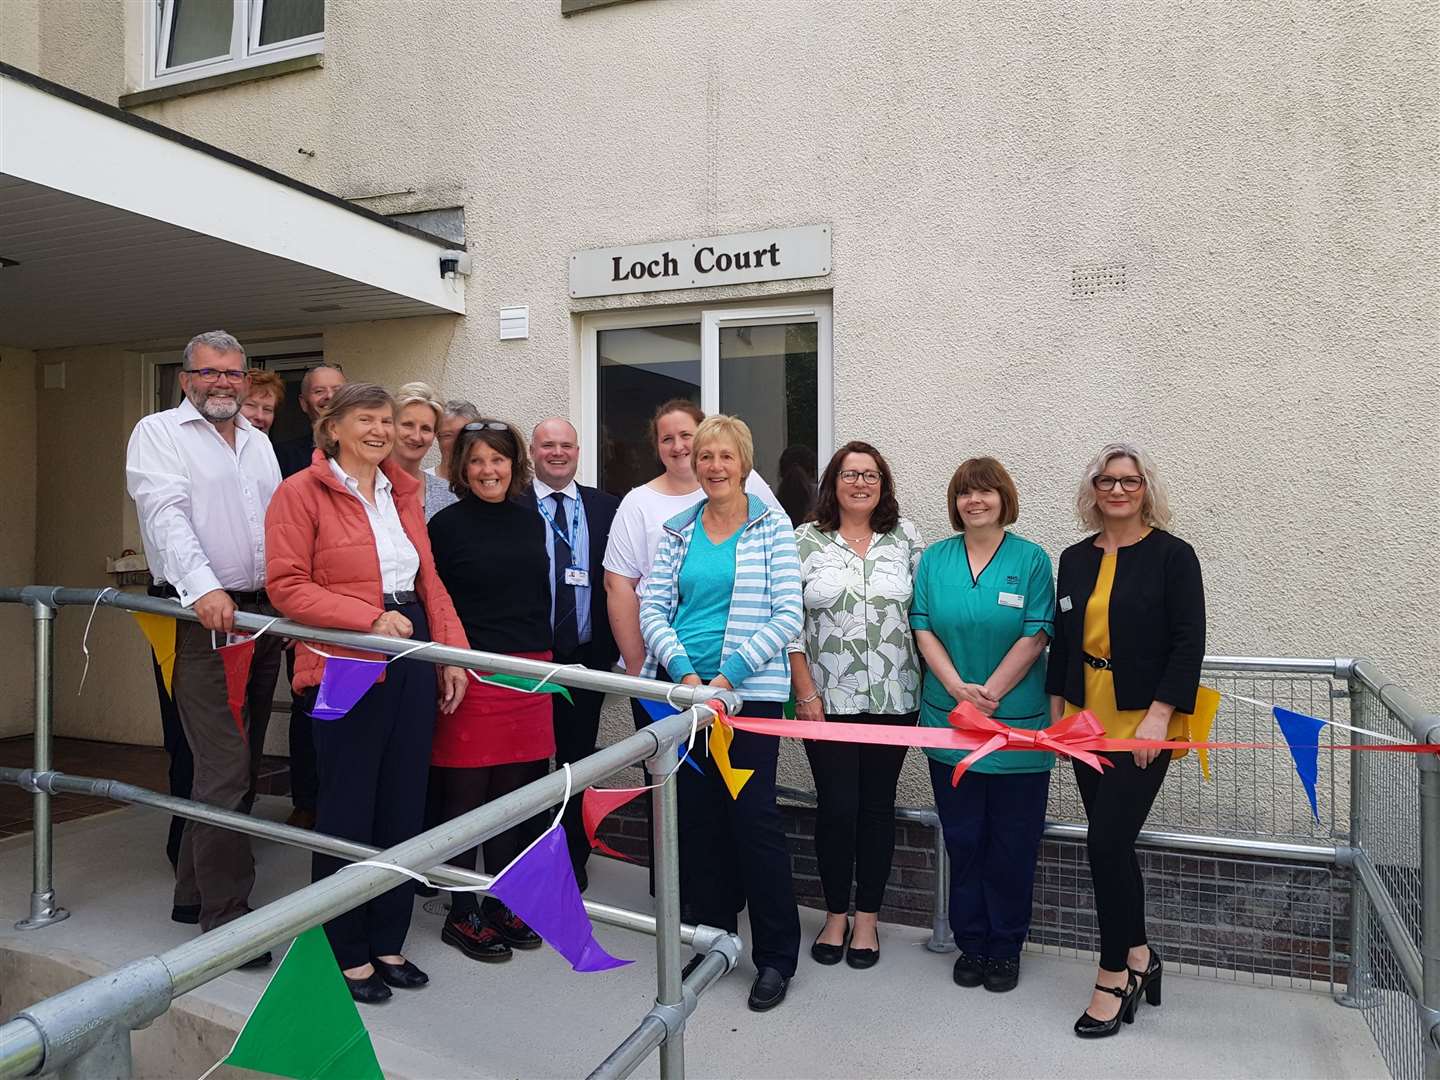 The opening of Loch Court, the new patient accommodation for Raigmore Hospital. Members of the accommodation team are pictured with patients' council members Pat Dobbie (second left), and Linda Burgin (fourth right), along with NHS Highland chief executive Iain Stewart (centre).